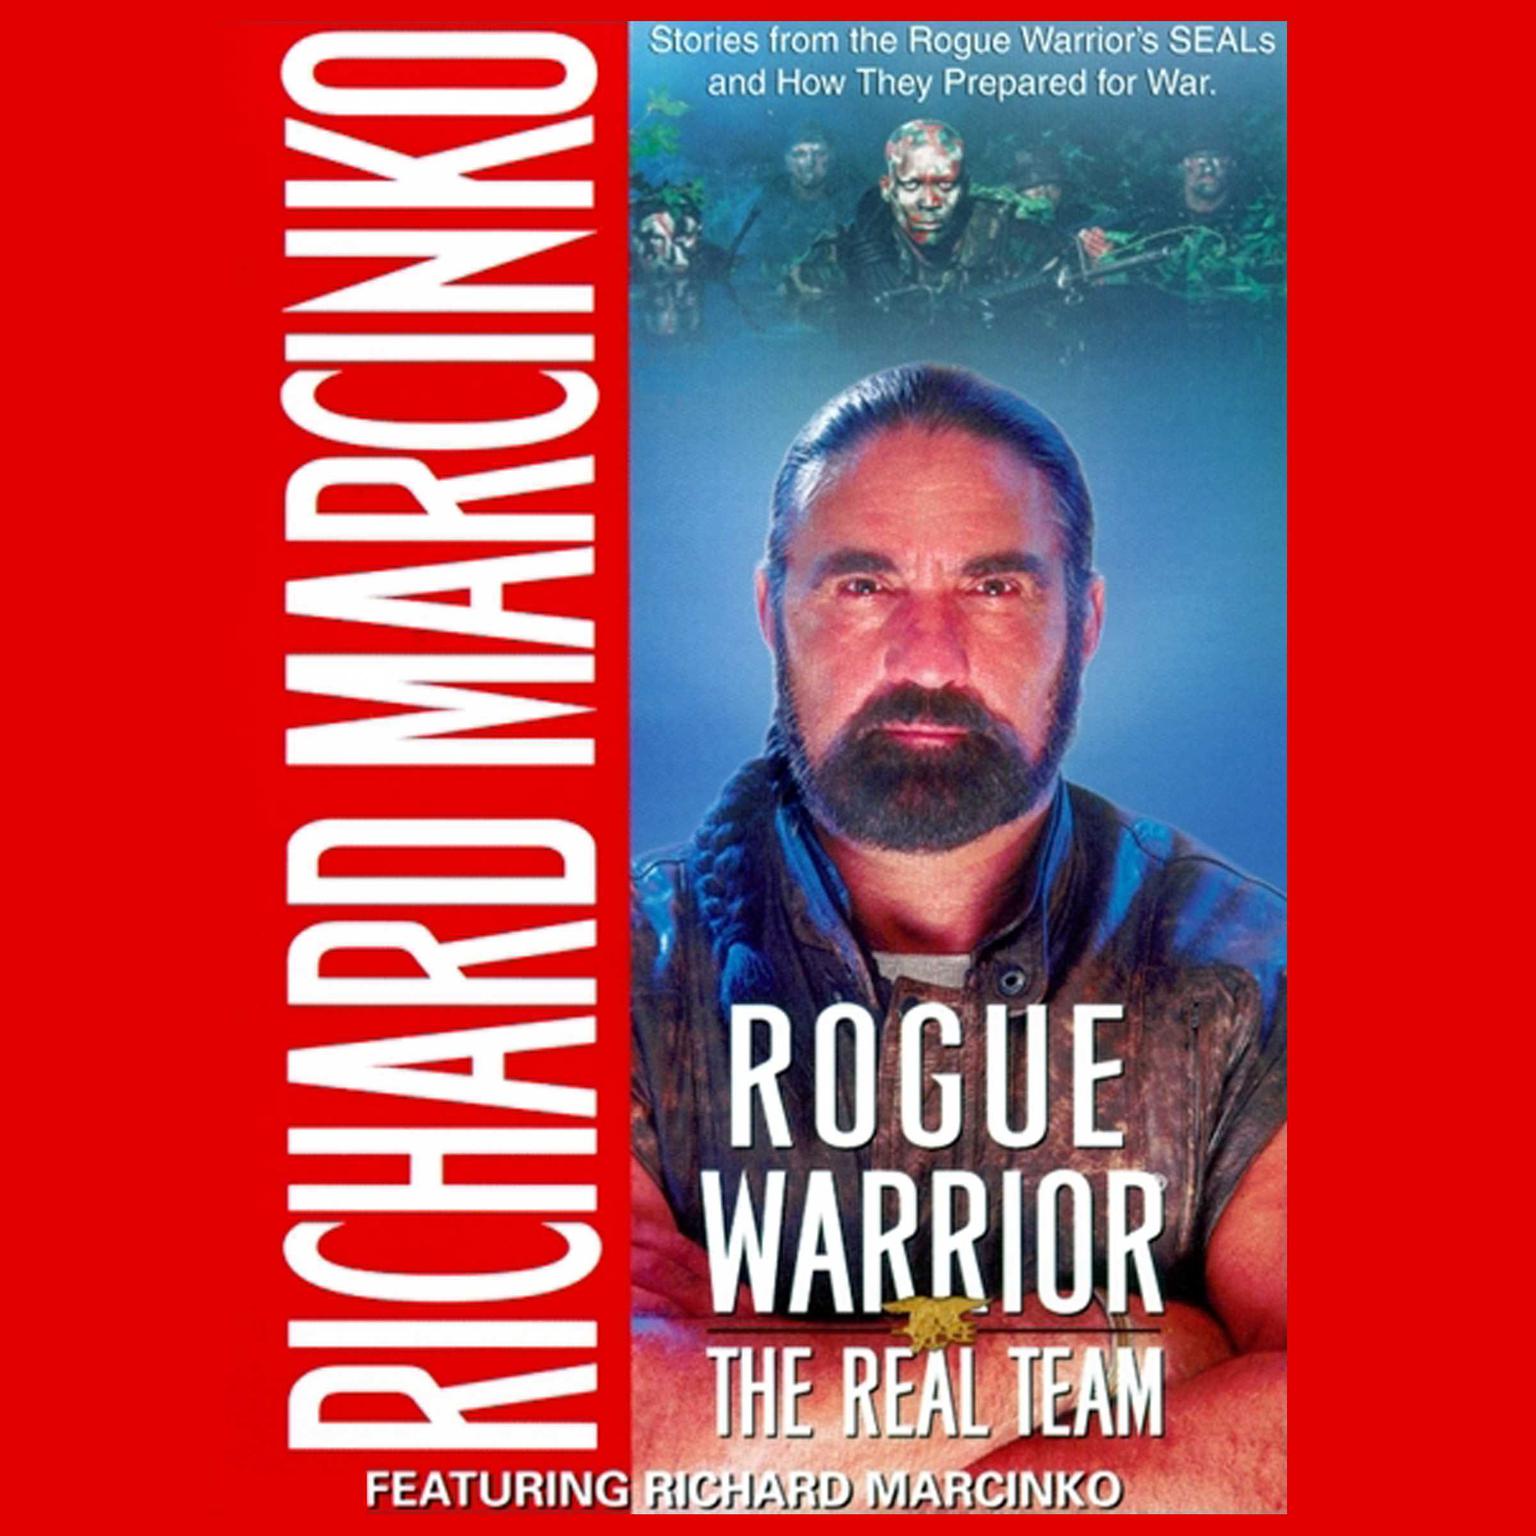 Rogue Warrior: The Real Team (Abridged): Real Team Audiobook, by Richard Marcinko